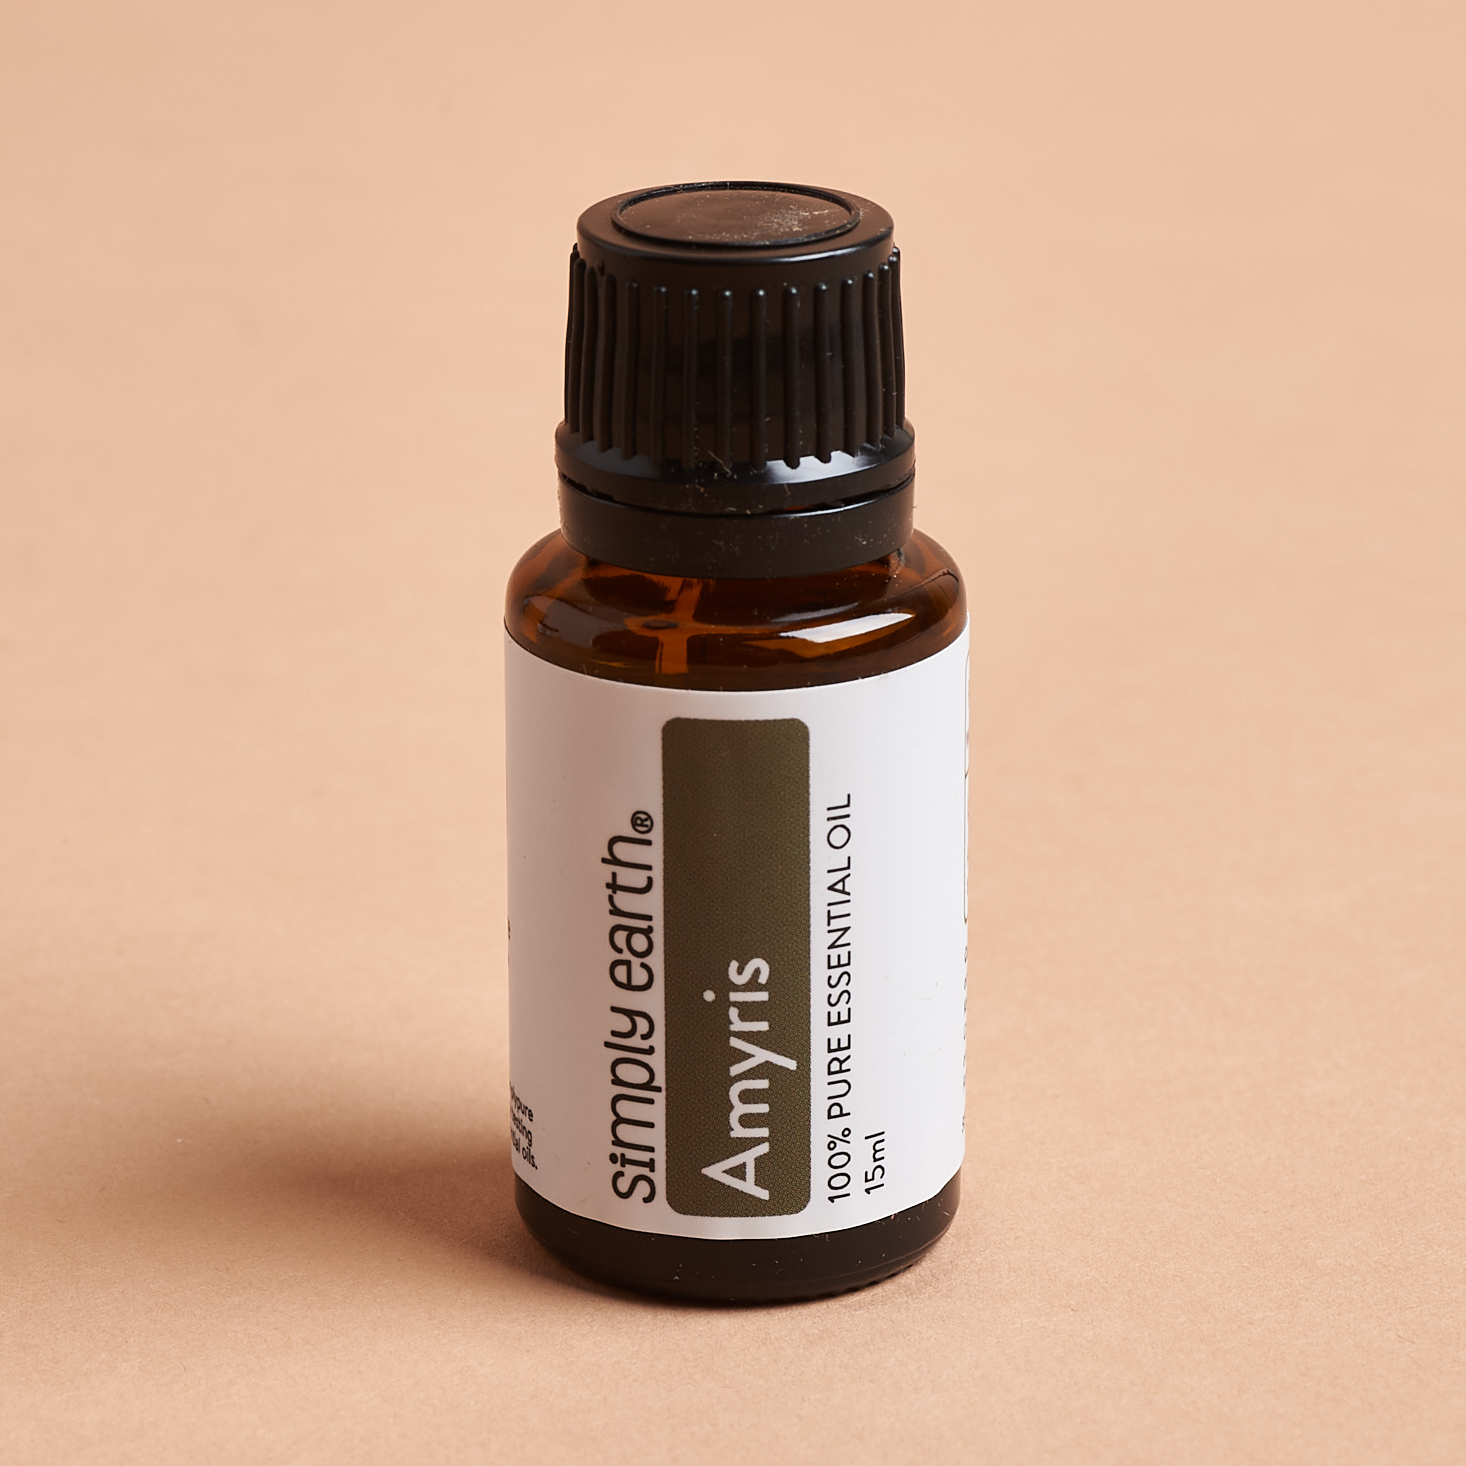 Simply Earth March 2021 amyris essential oil